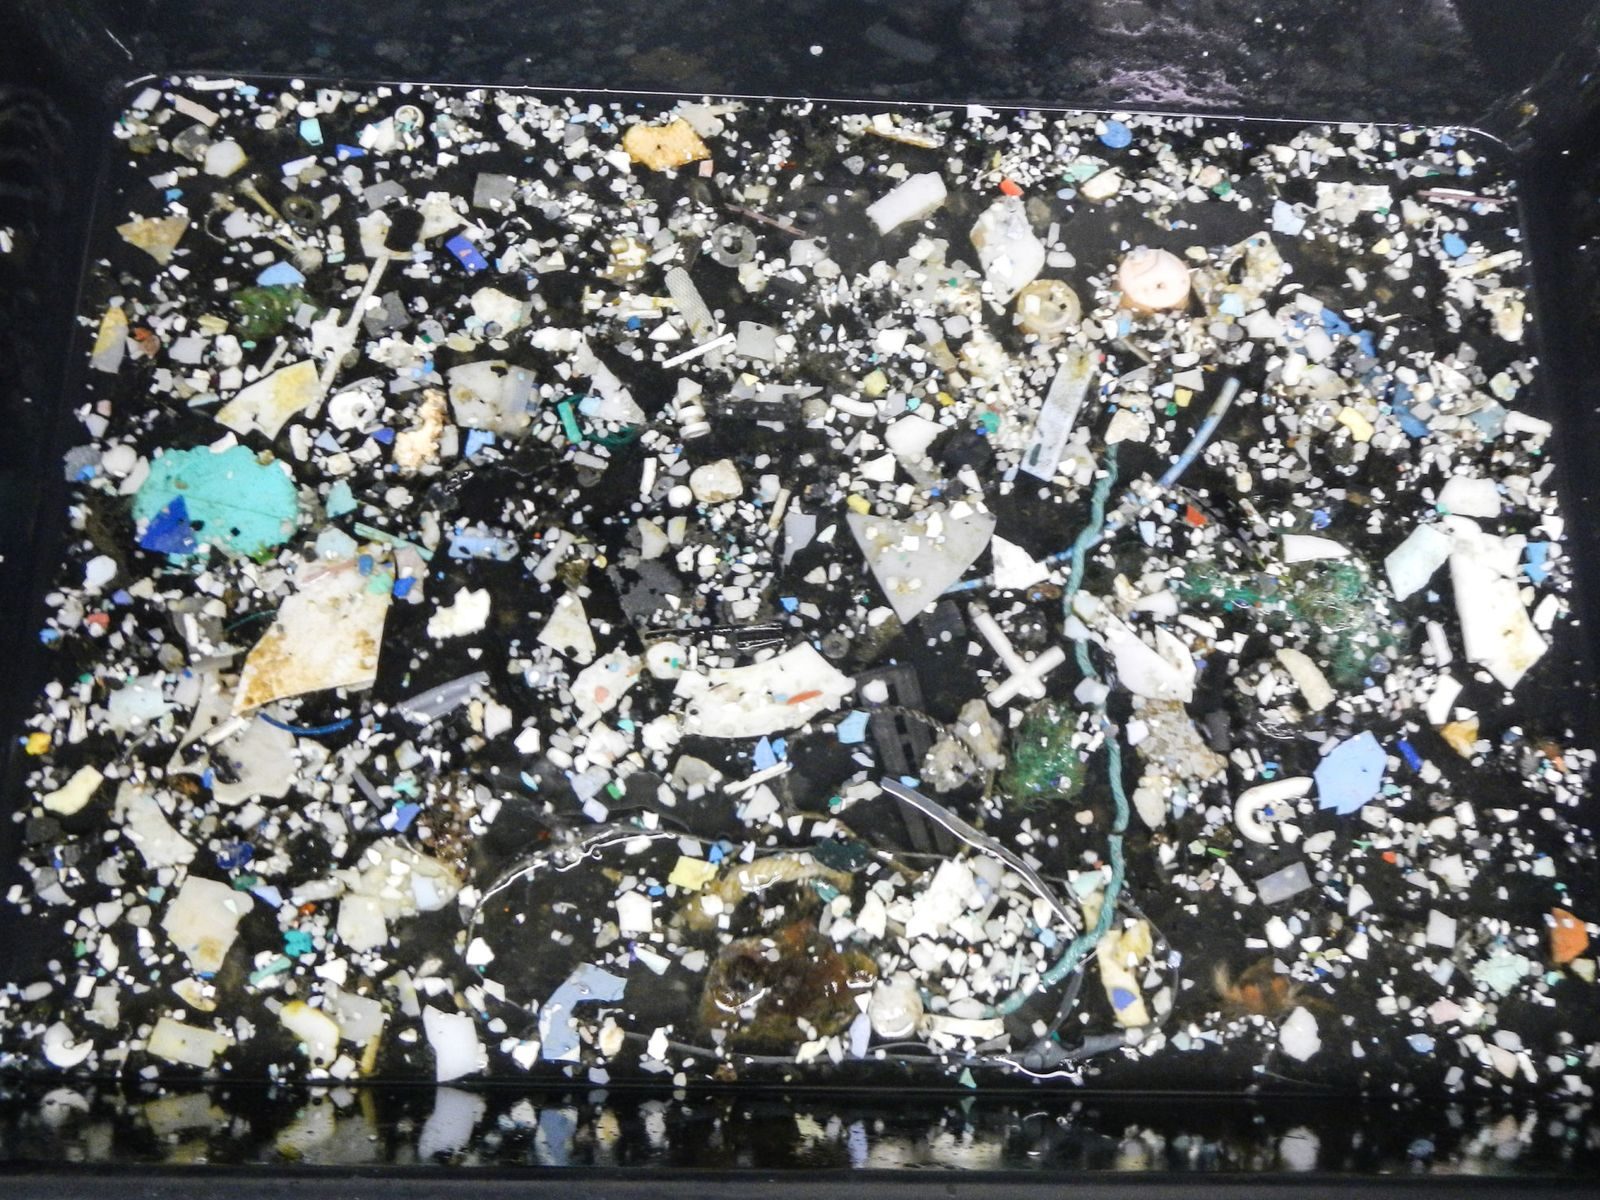 There are 1.8 trillion pieces of plastic in the Great Pacific Garbage Patch.